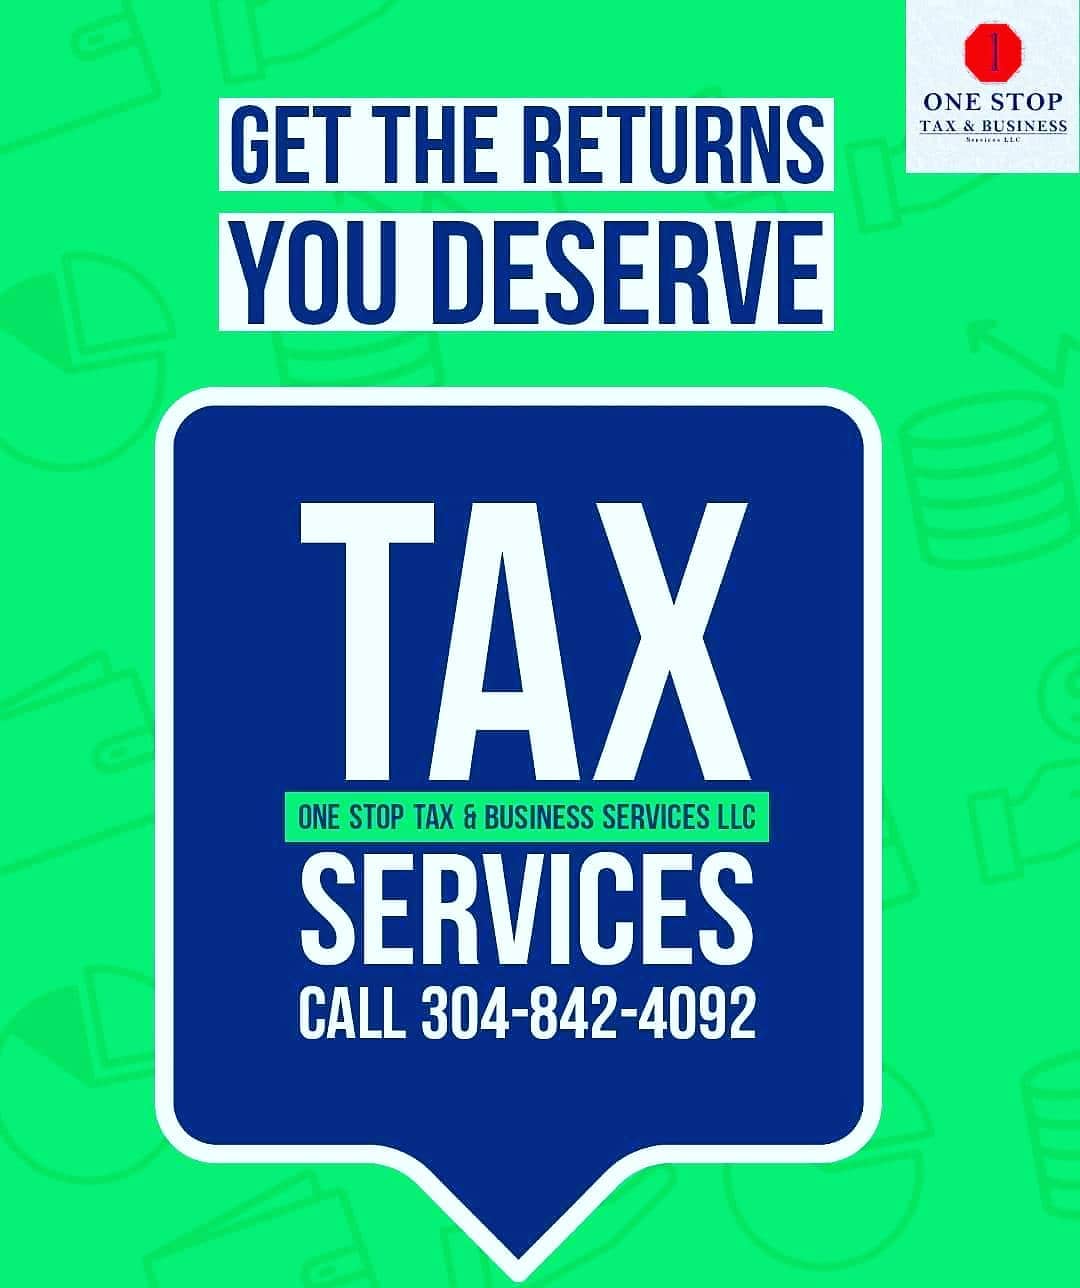 One Stop Tax & Business Services LLC